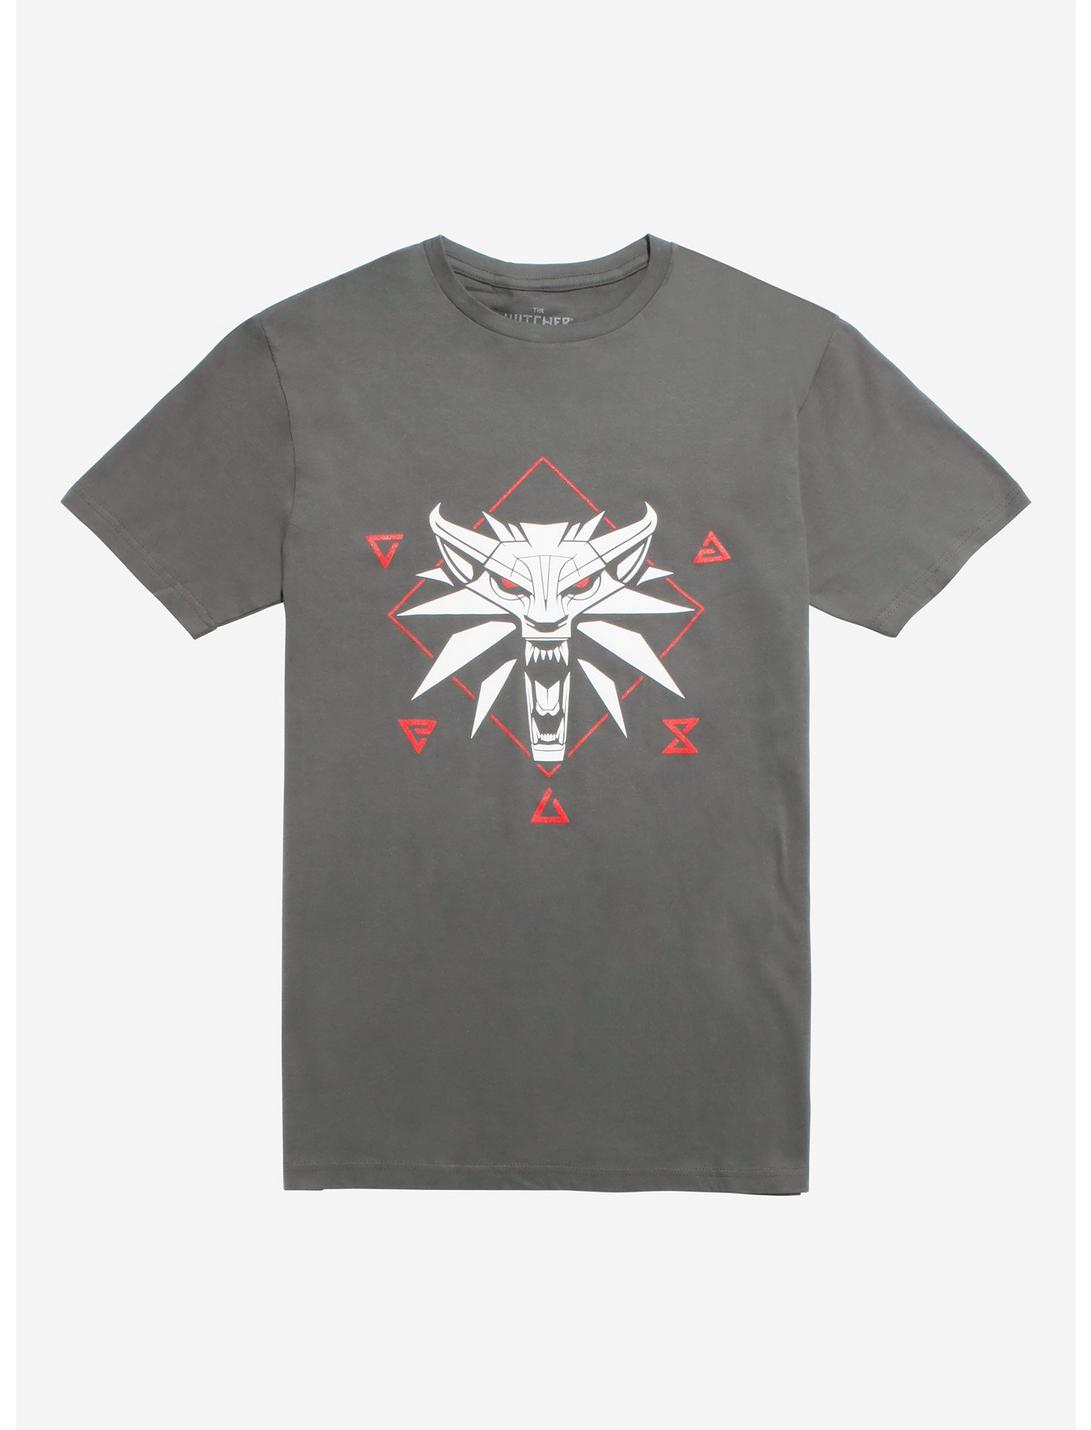 The Witcher 3 Wolf Signs T-Shirt, GREY, hi-res